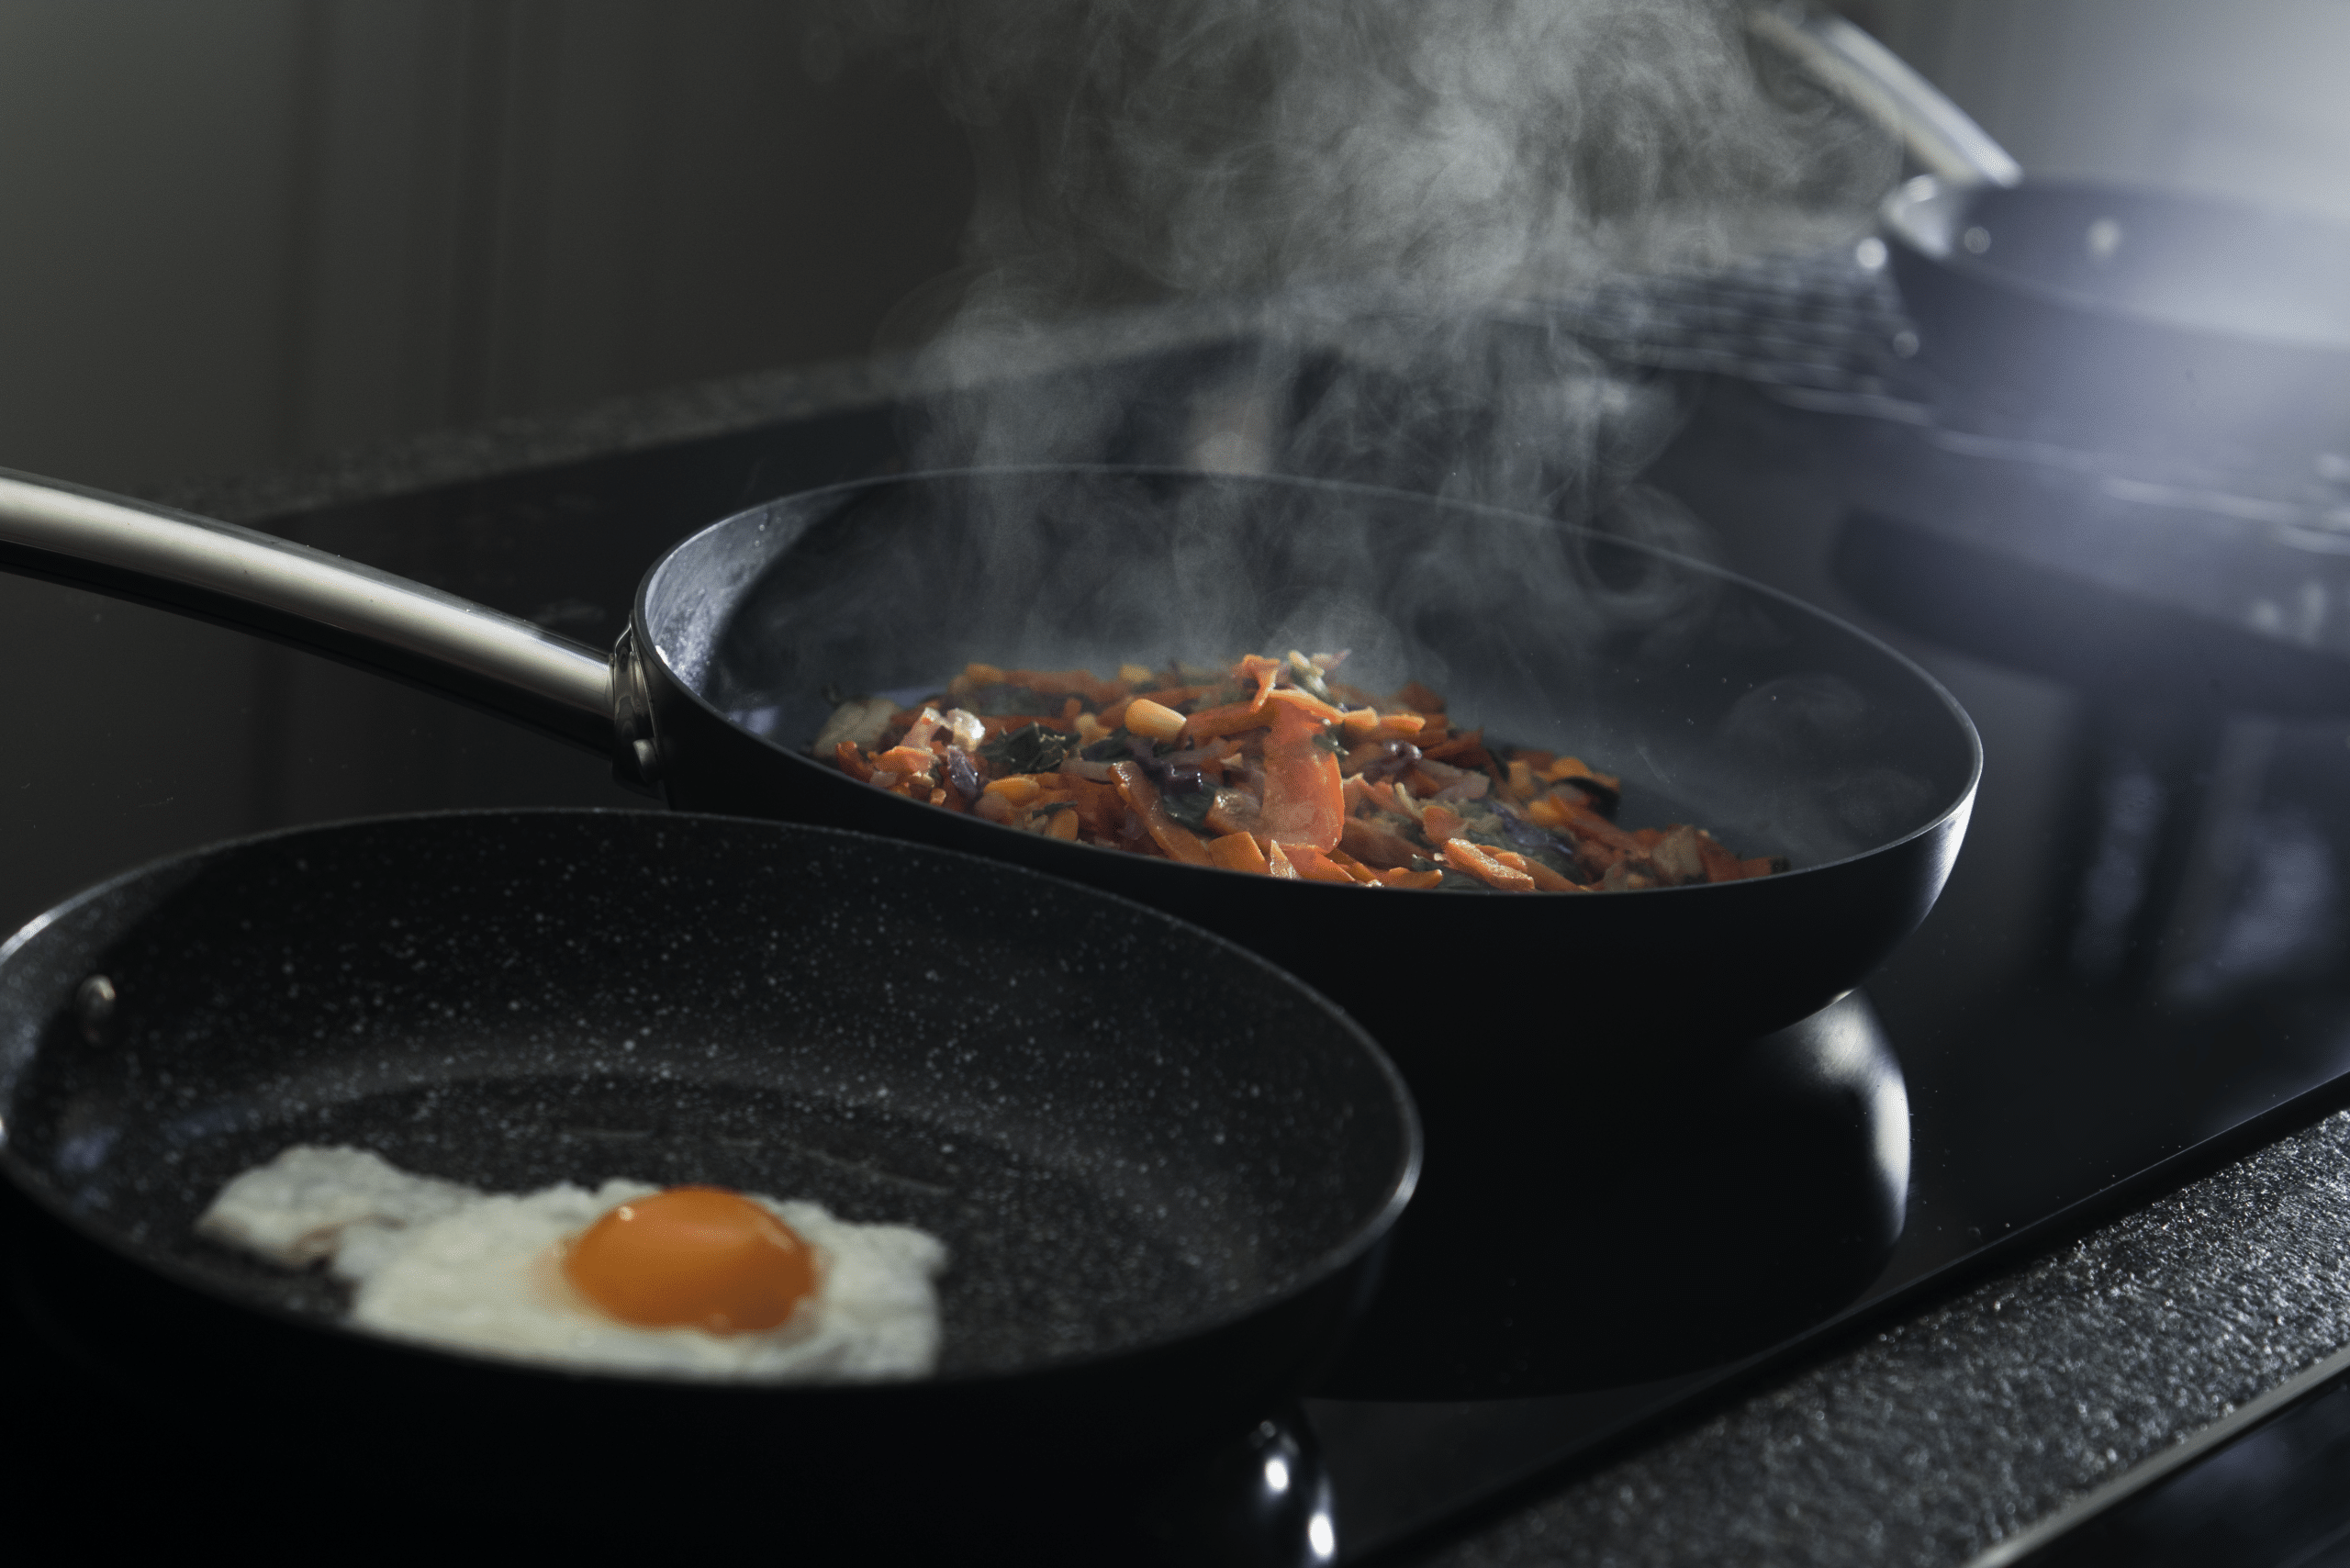 You should probably throw away your pans and replace them with